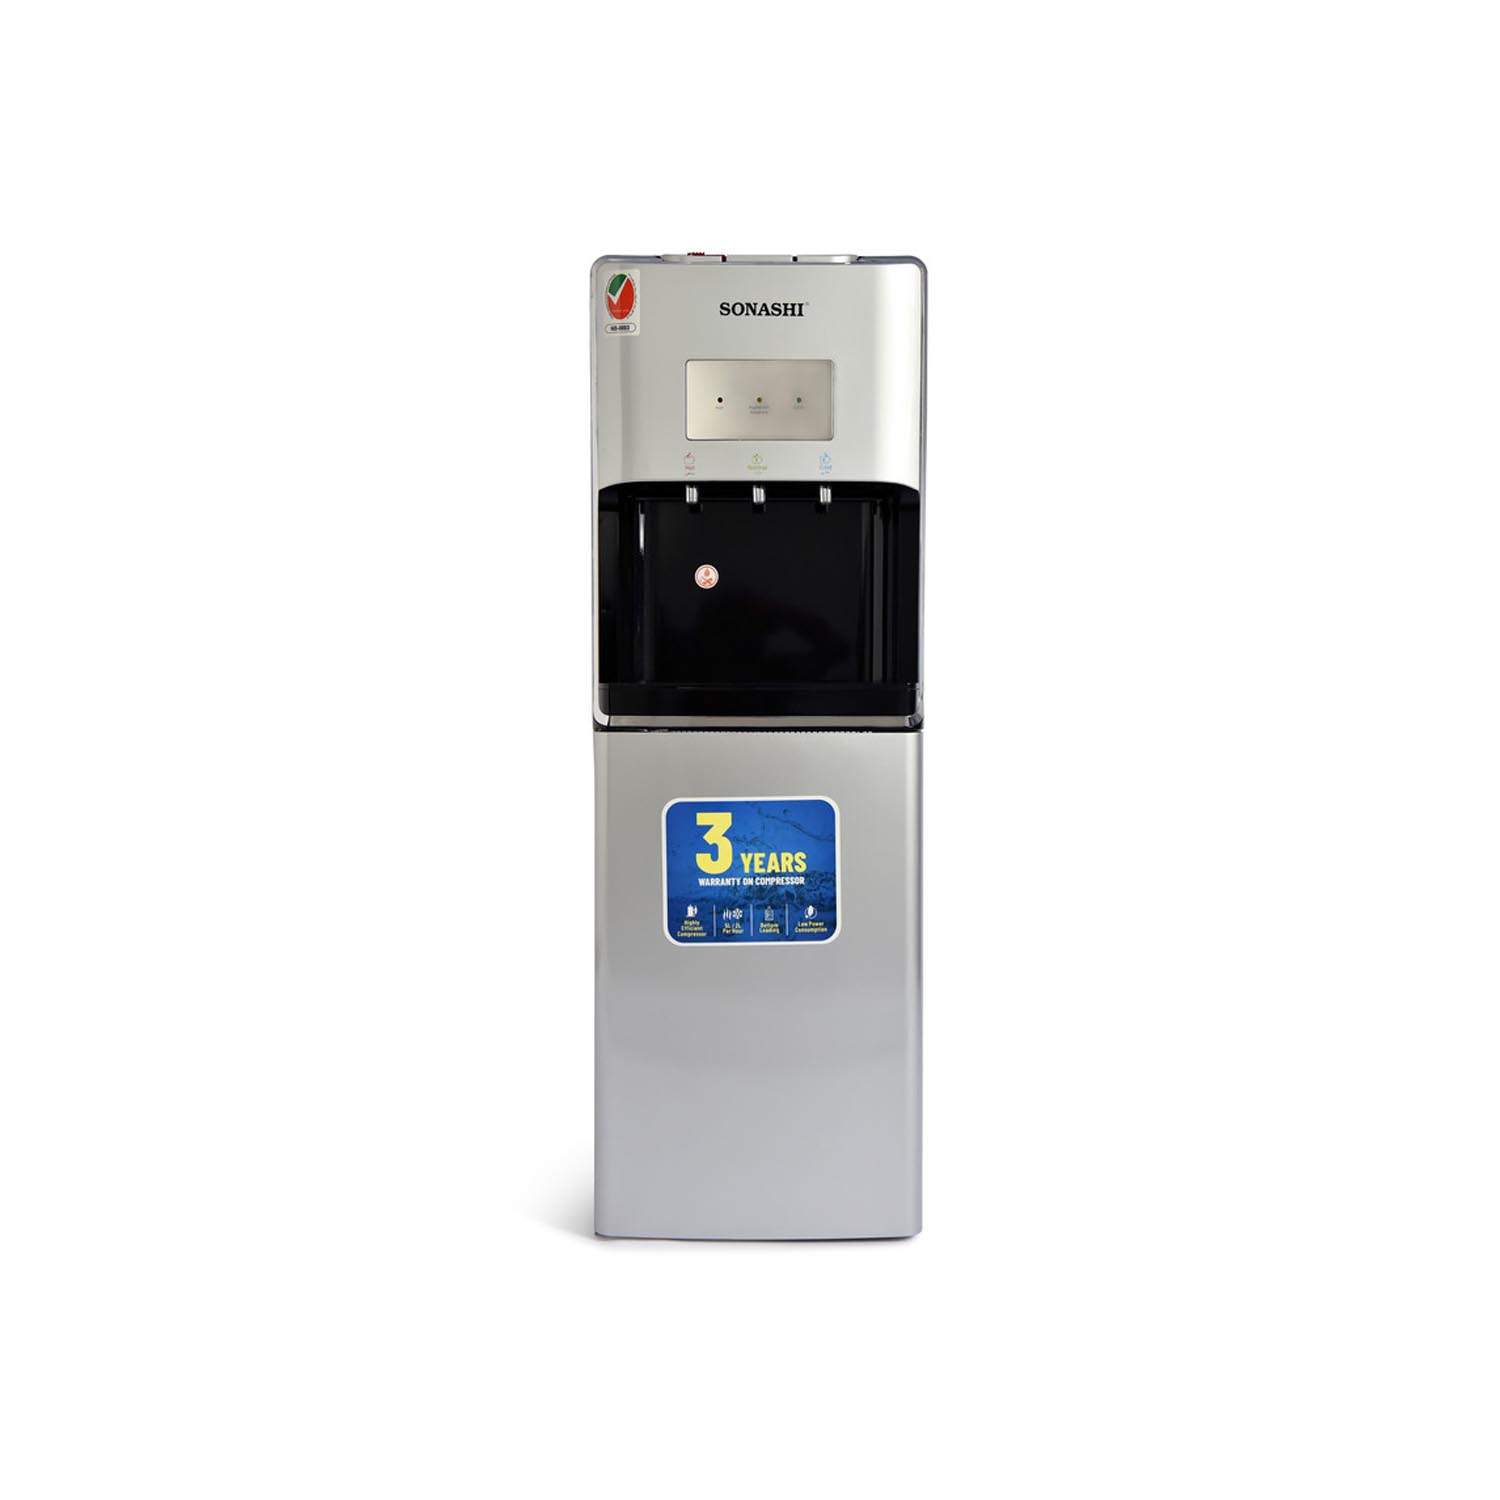 Sonashi 3 Tap Hot & Cold Standing Water Dispenser - Silver